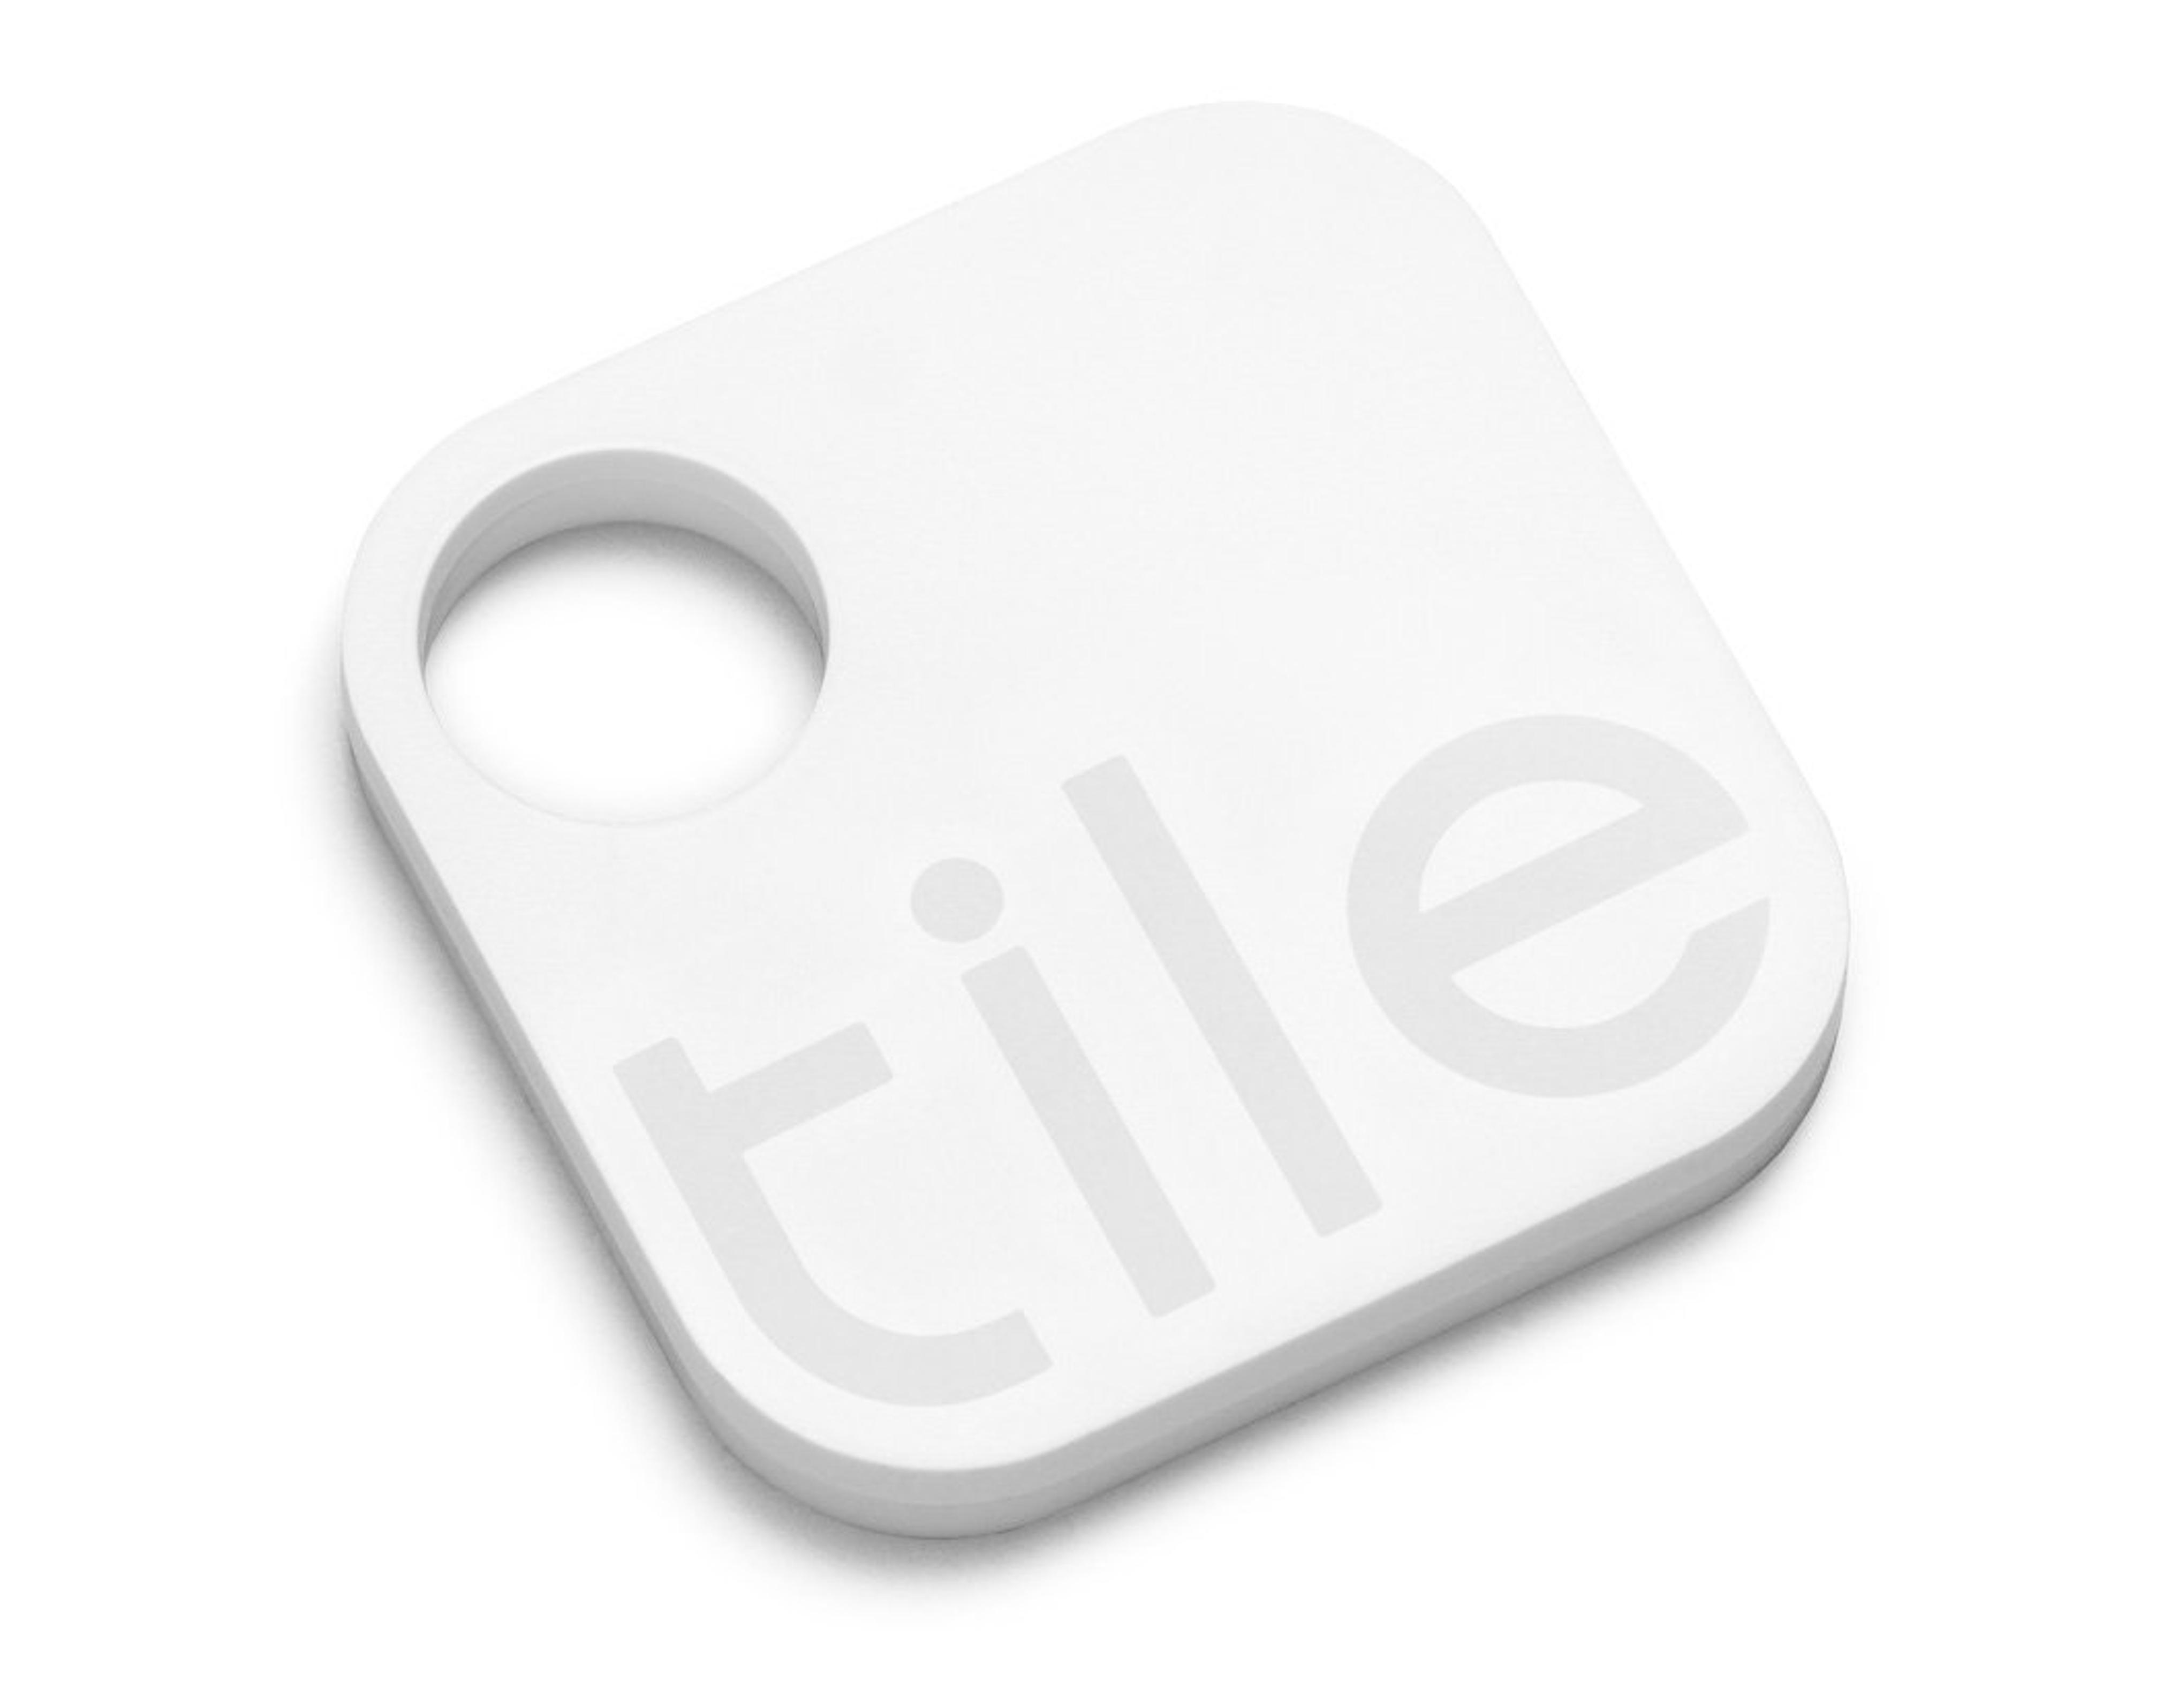 Tile For Finding Anything and Everything, iOS, Pack of 4